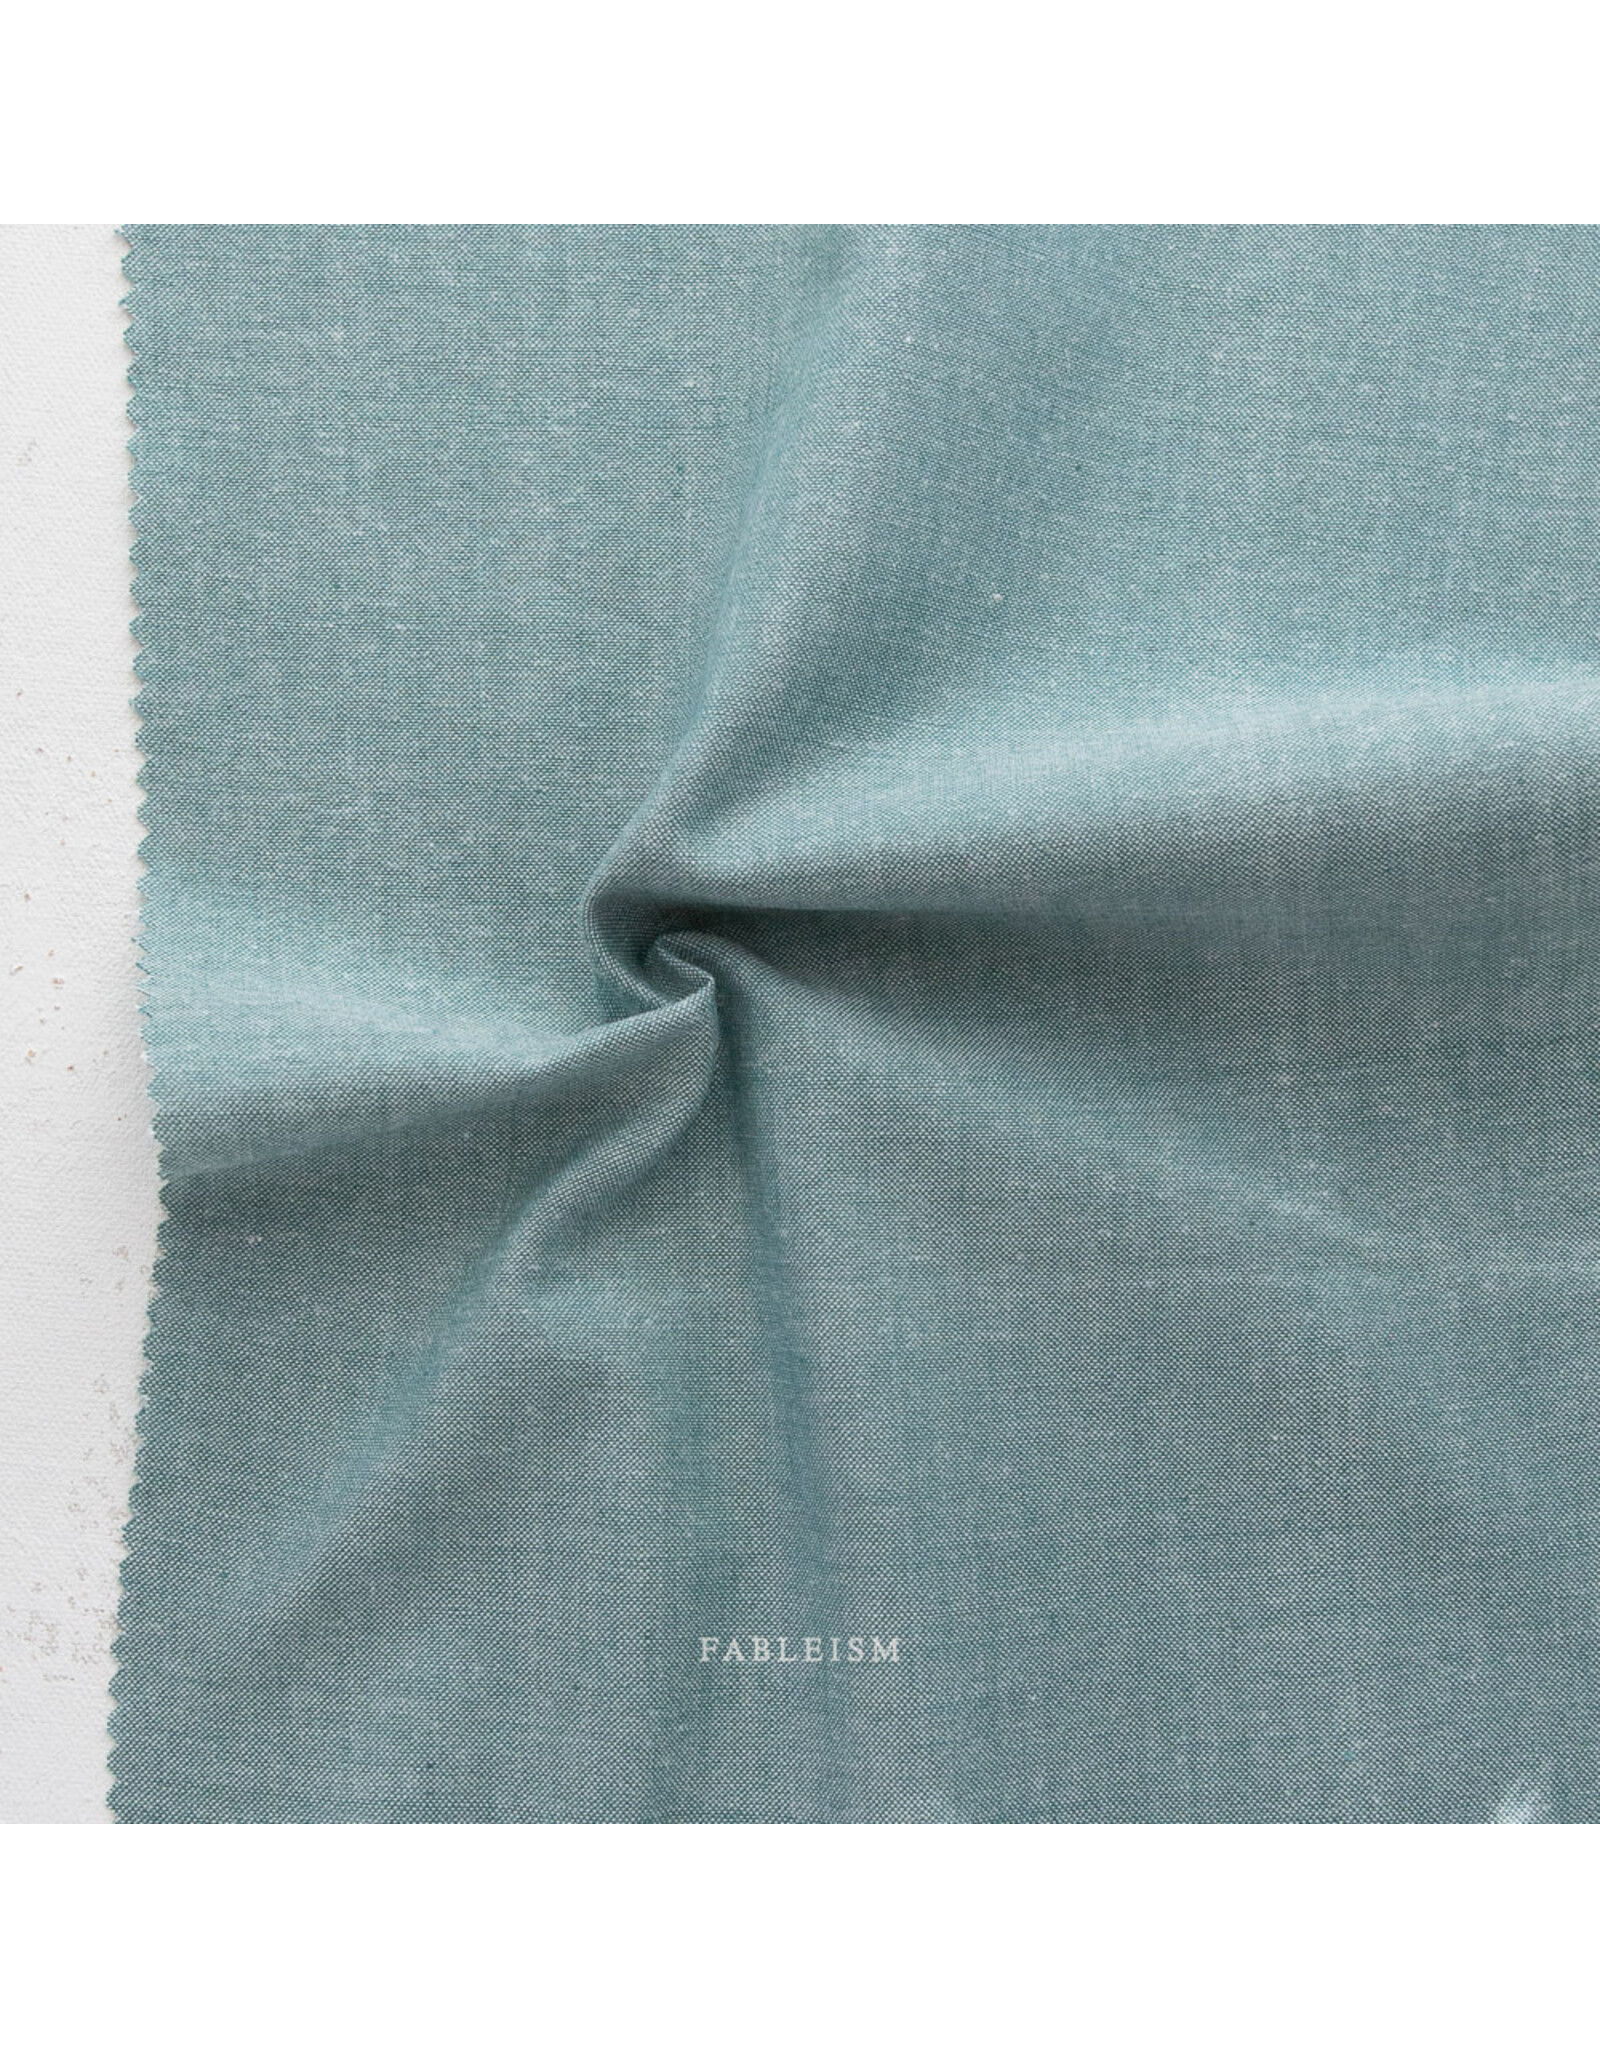 Fableism Everyday Chambray, Bay Leaf, Fabric Half-Yards